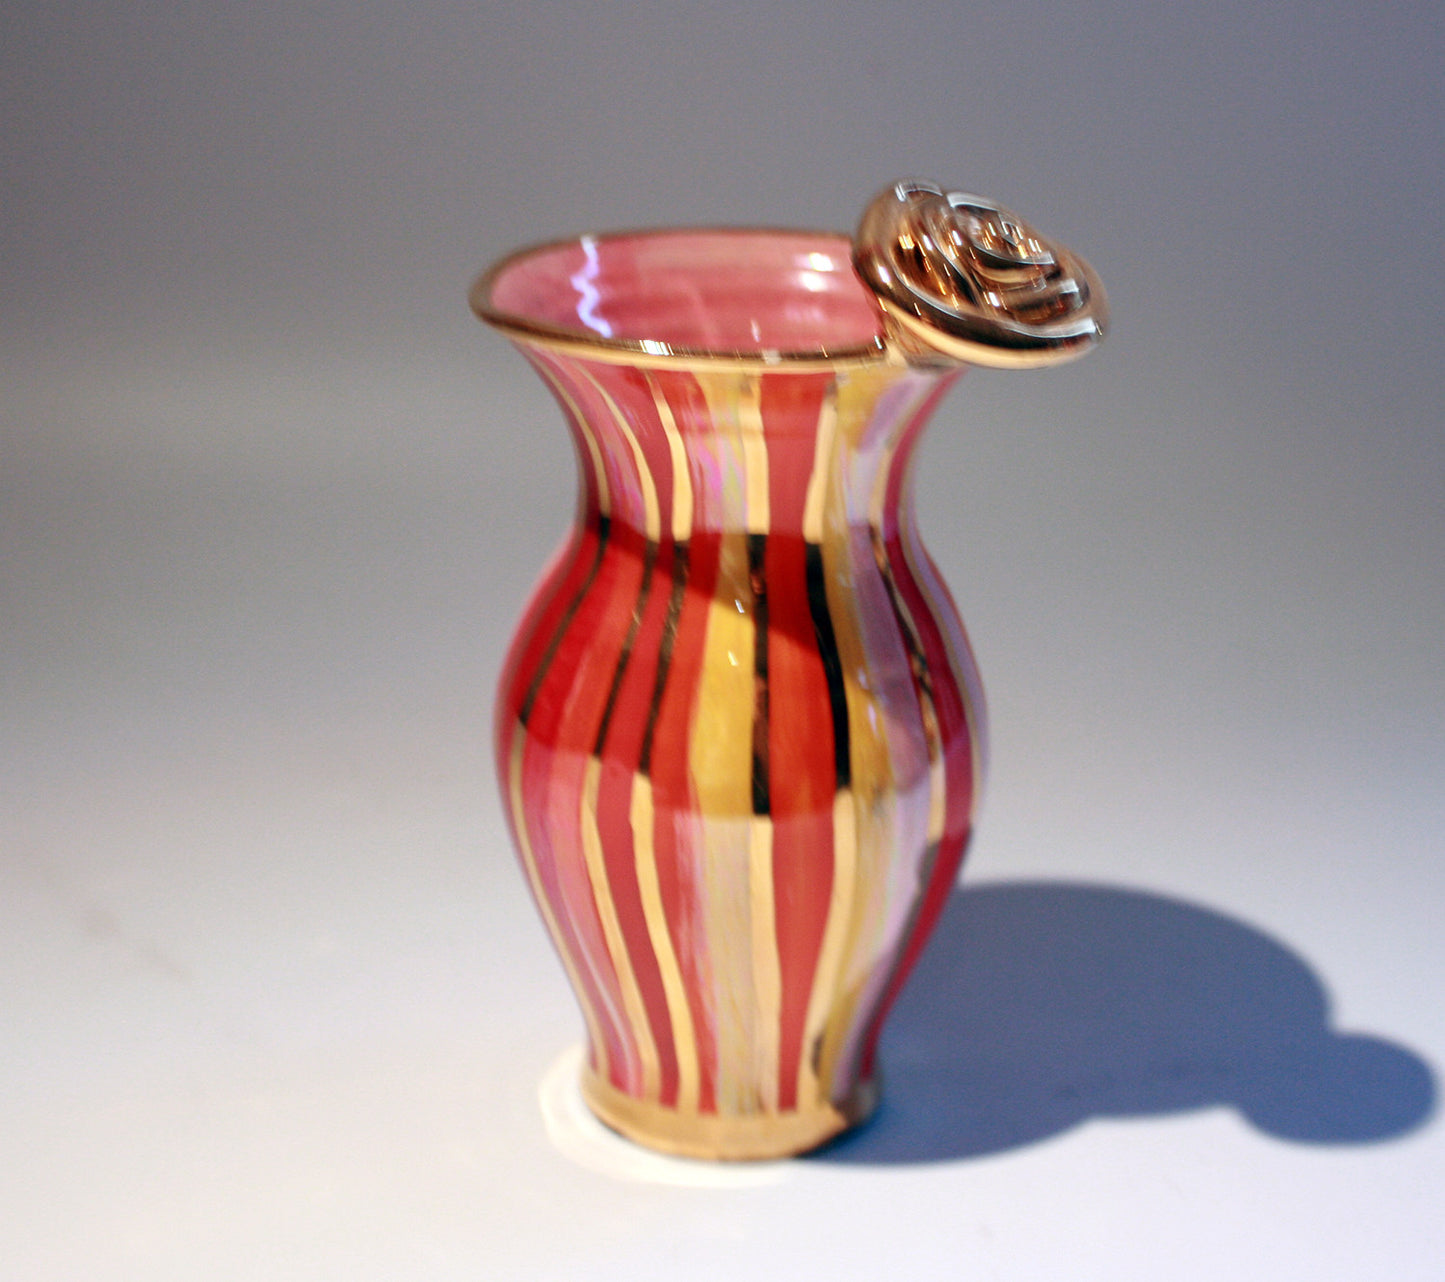 Tiny Rose Edged Vase Shades of Red Stripes - MaryRoseYoung